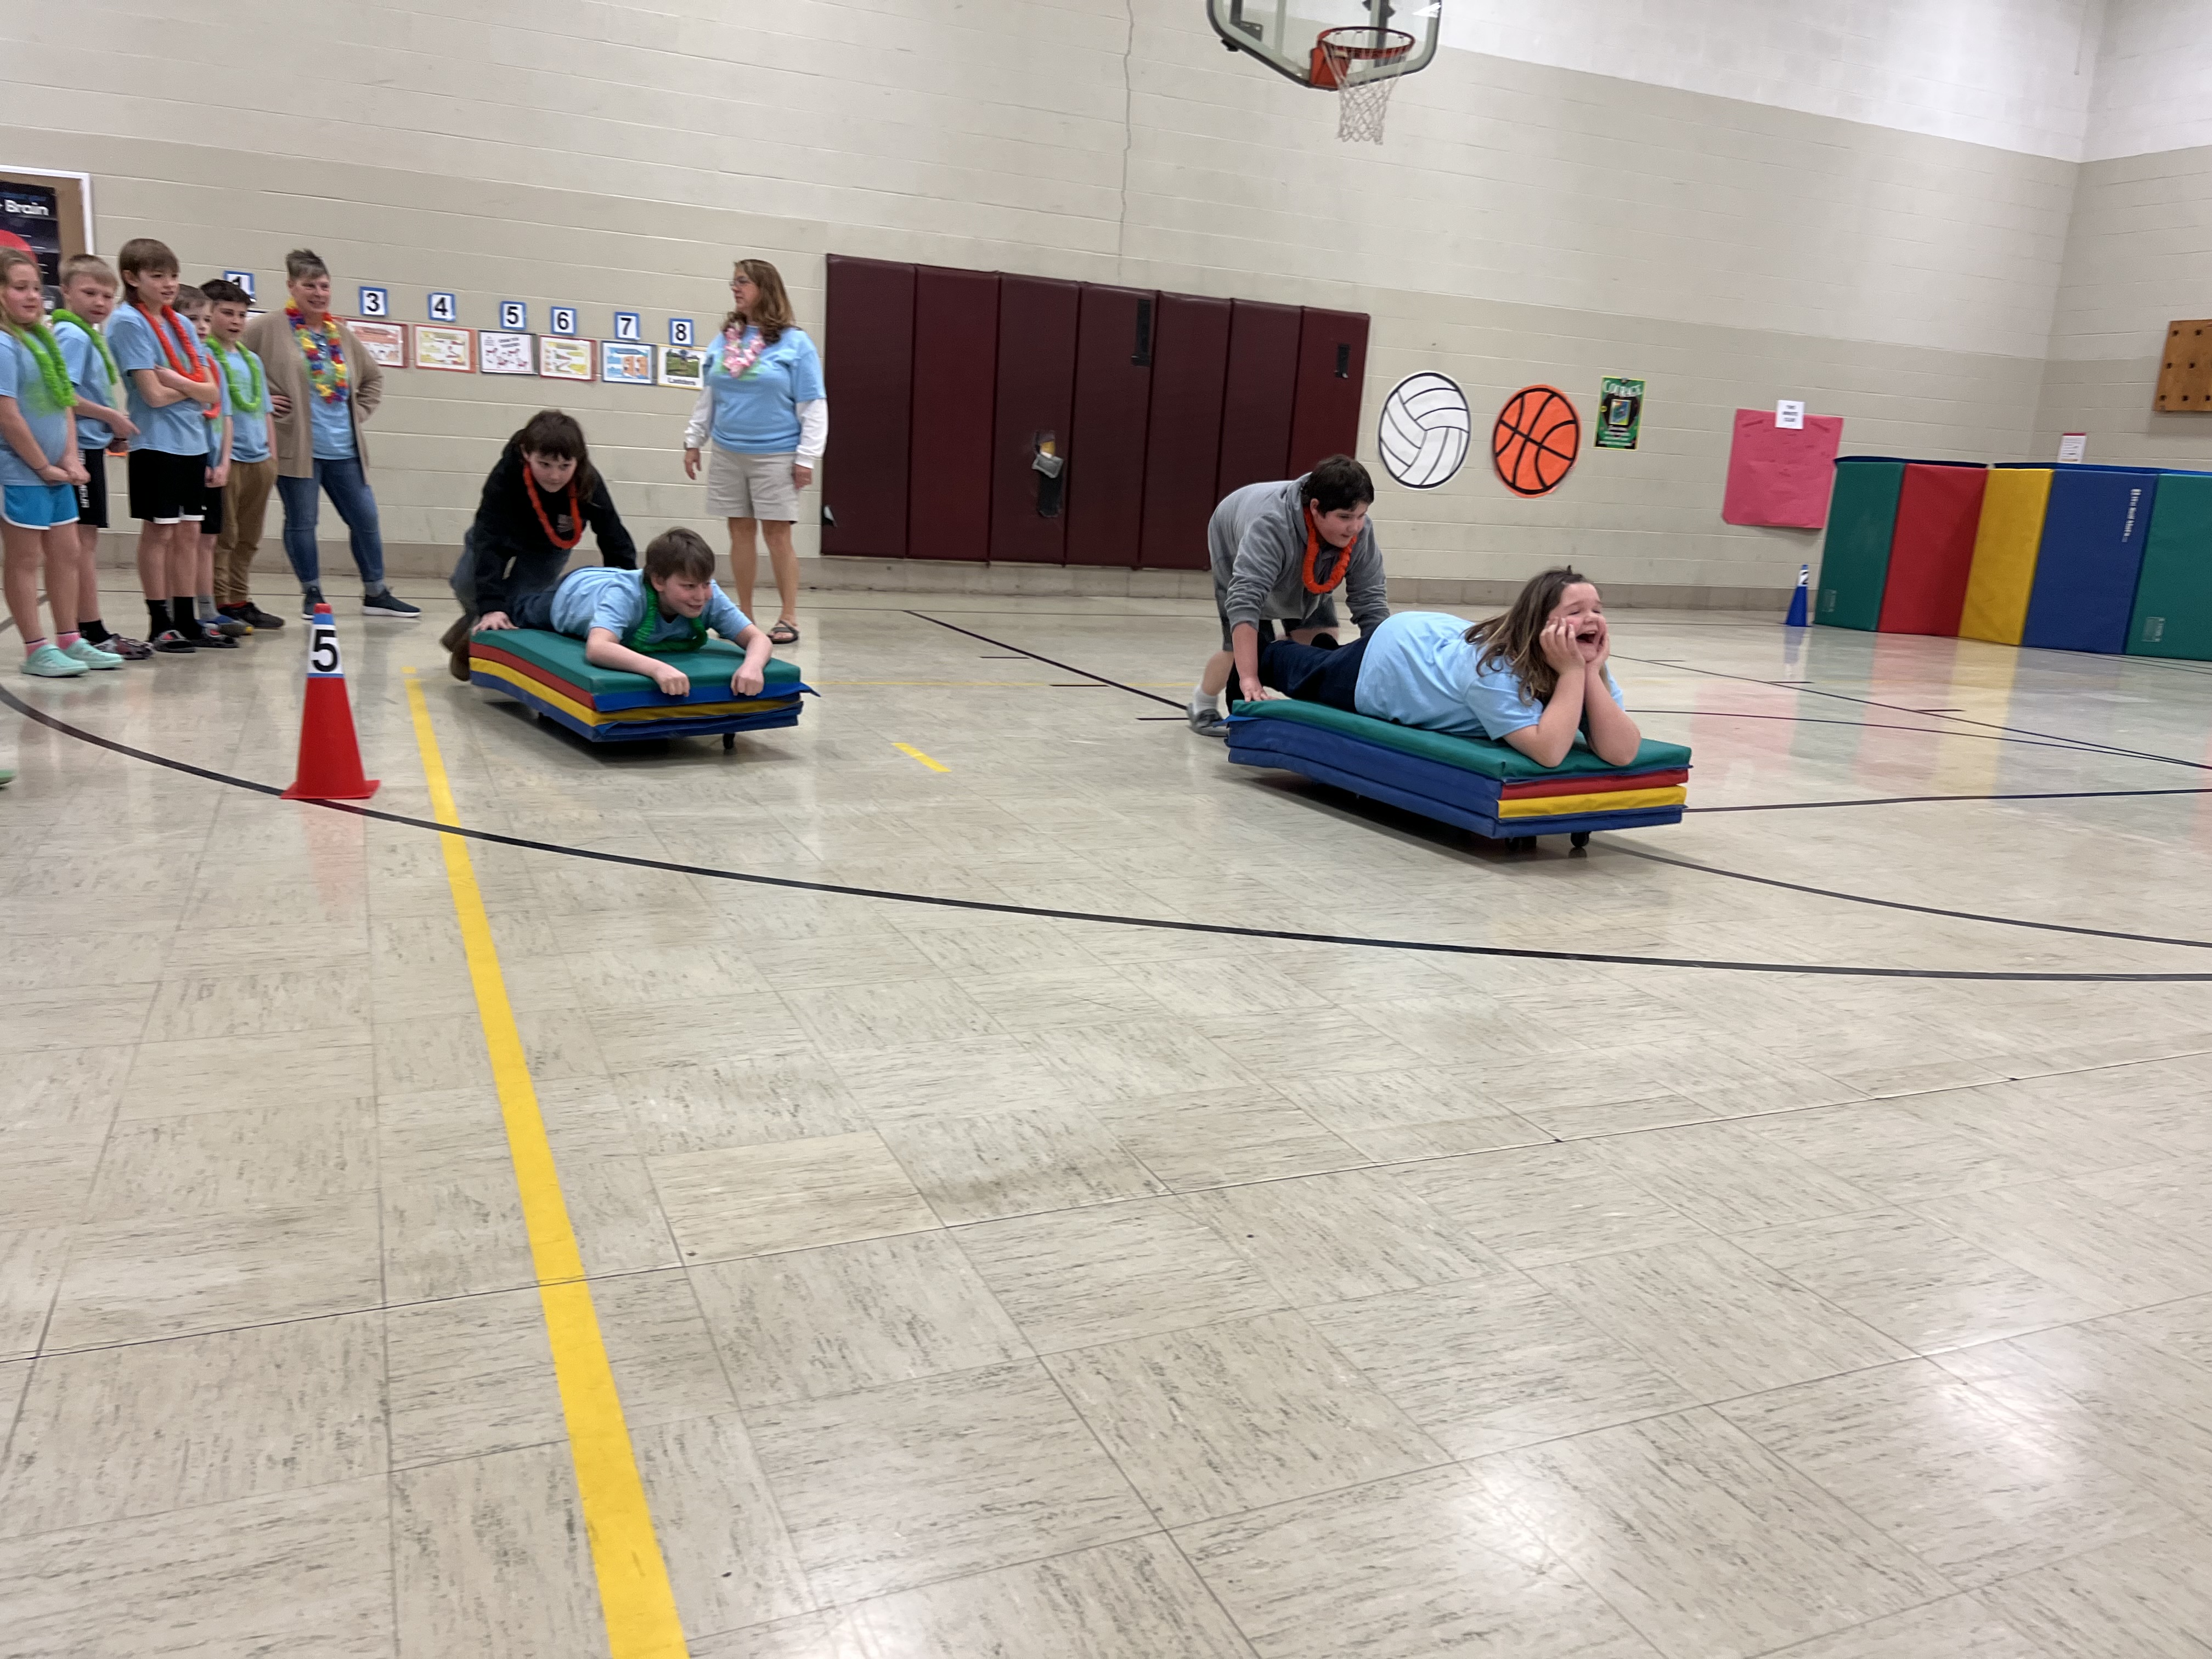 students participating in a "surfing" PE activity